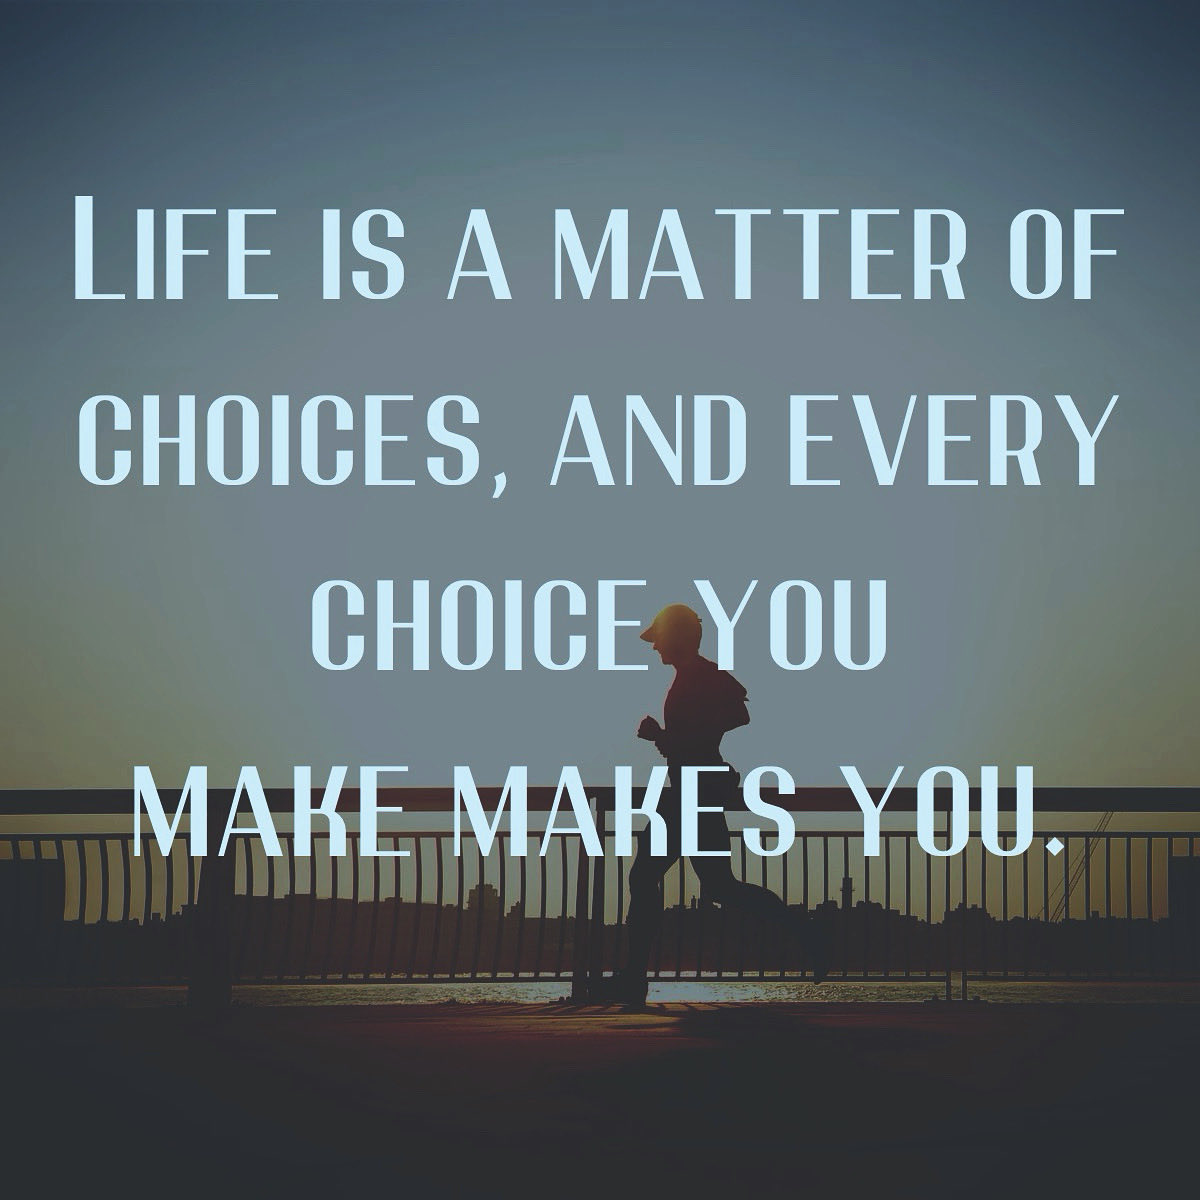 #choices #healthychoice #prochoice #grit #life #decisions #lifestyle #mindsetiseverything #selfmastery #fitness #discipline #goals